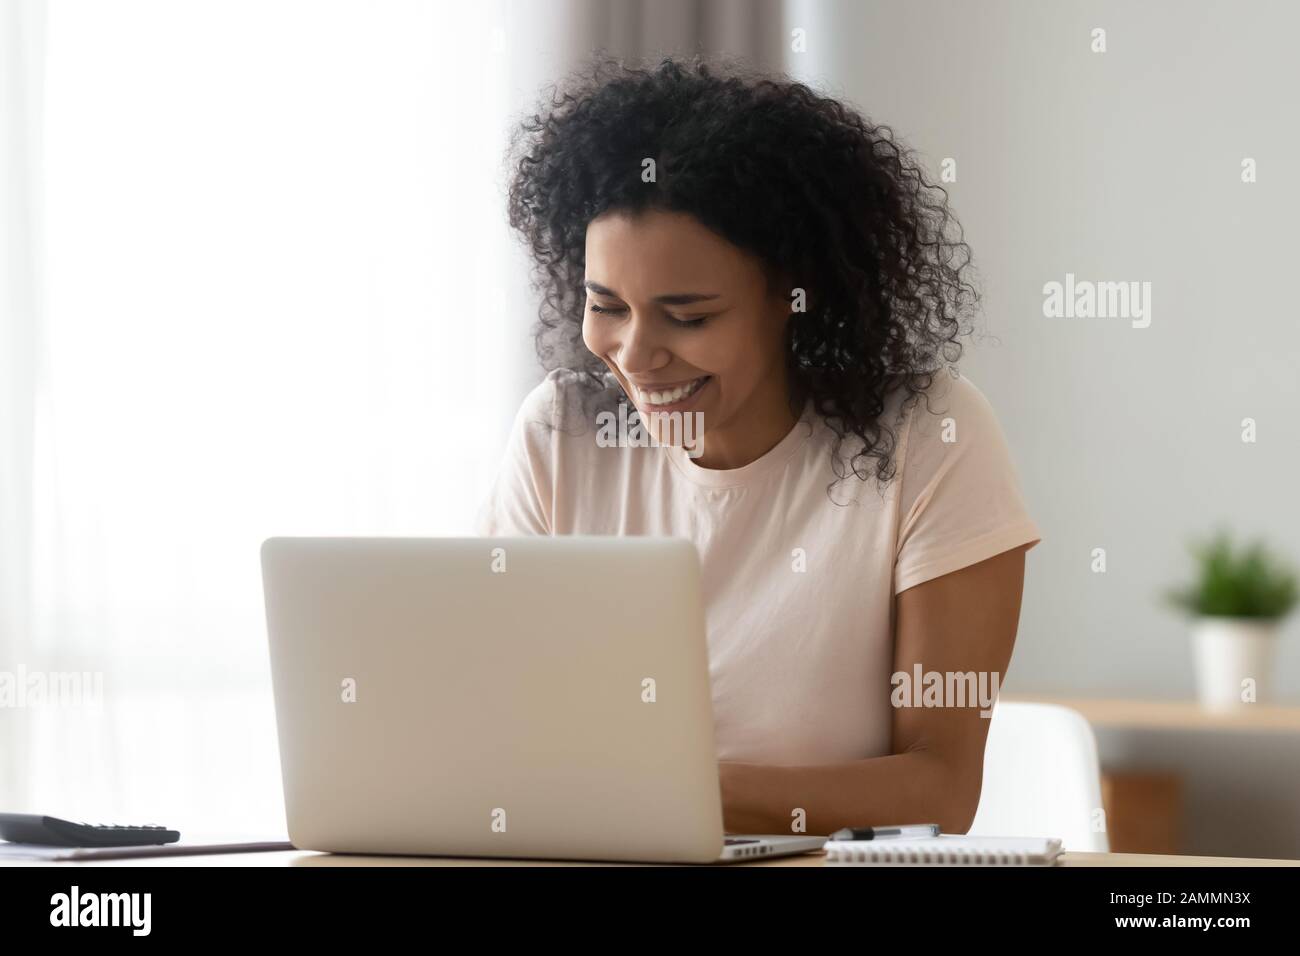 African woman sitting at desk laughing chatting with friend online Stock Photo